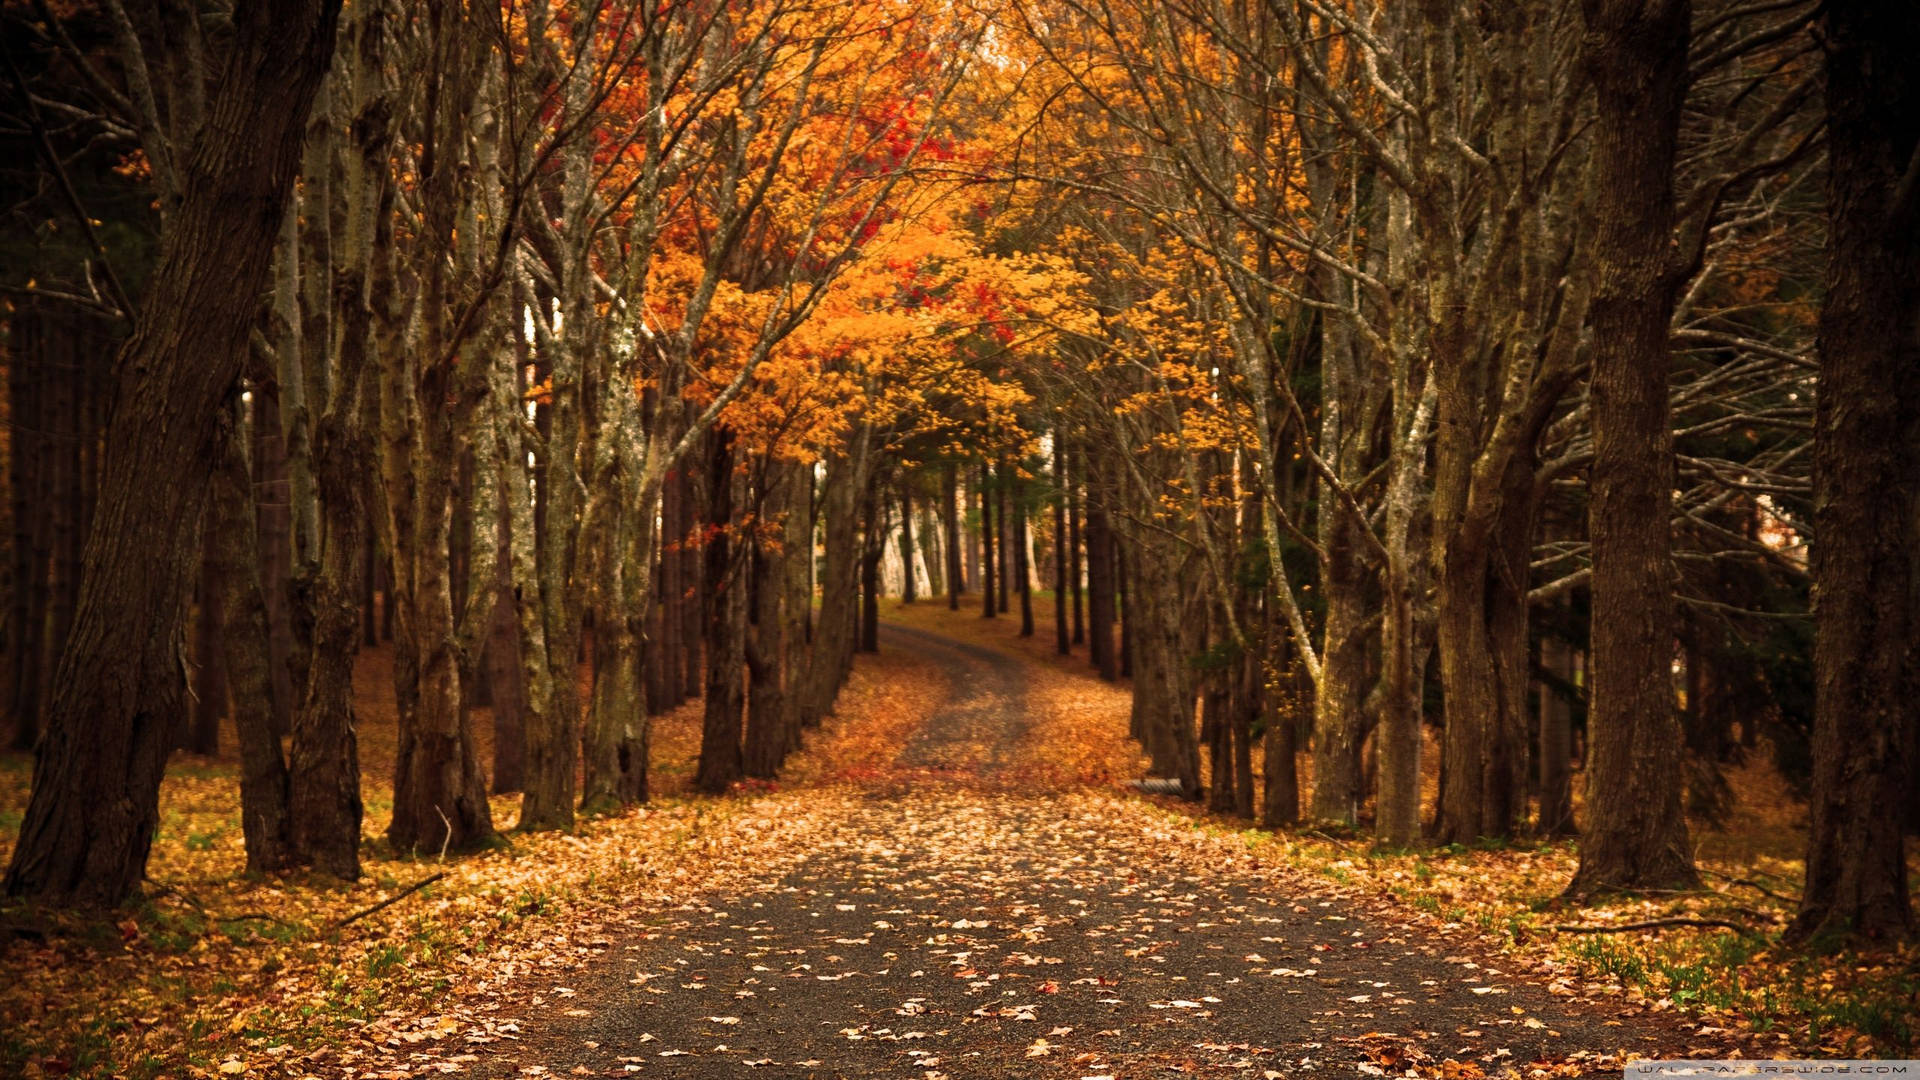 Road covered in orange fallen leaves from big trees, country road during autumn season.